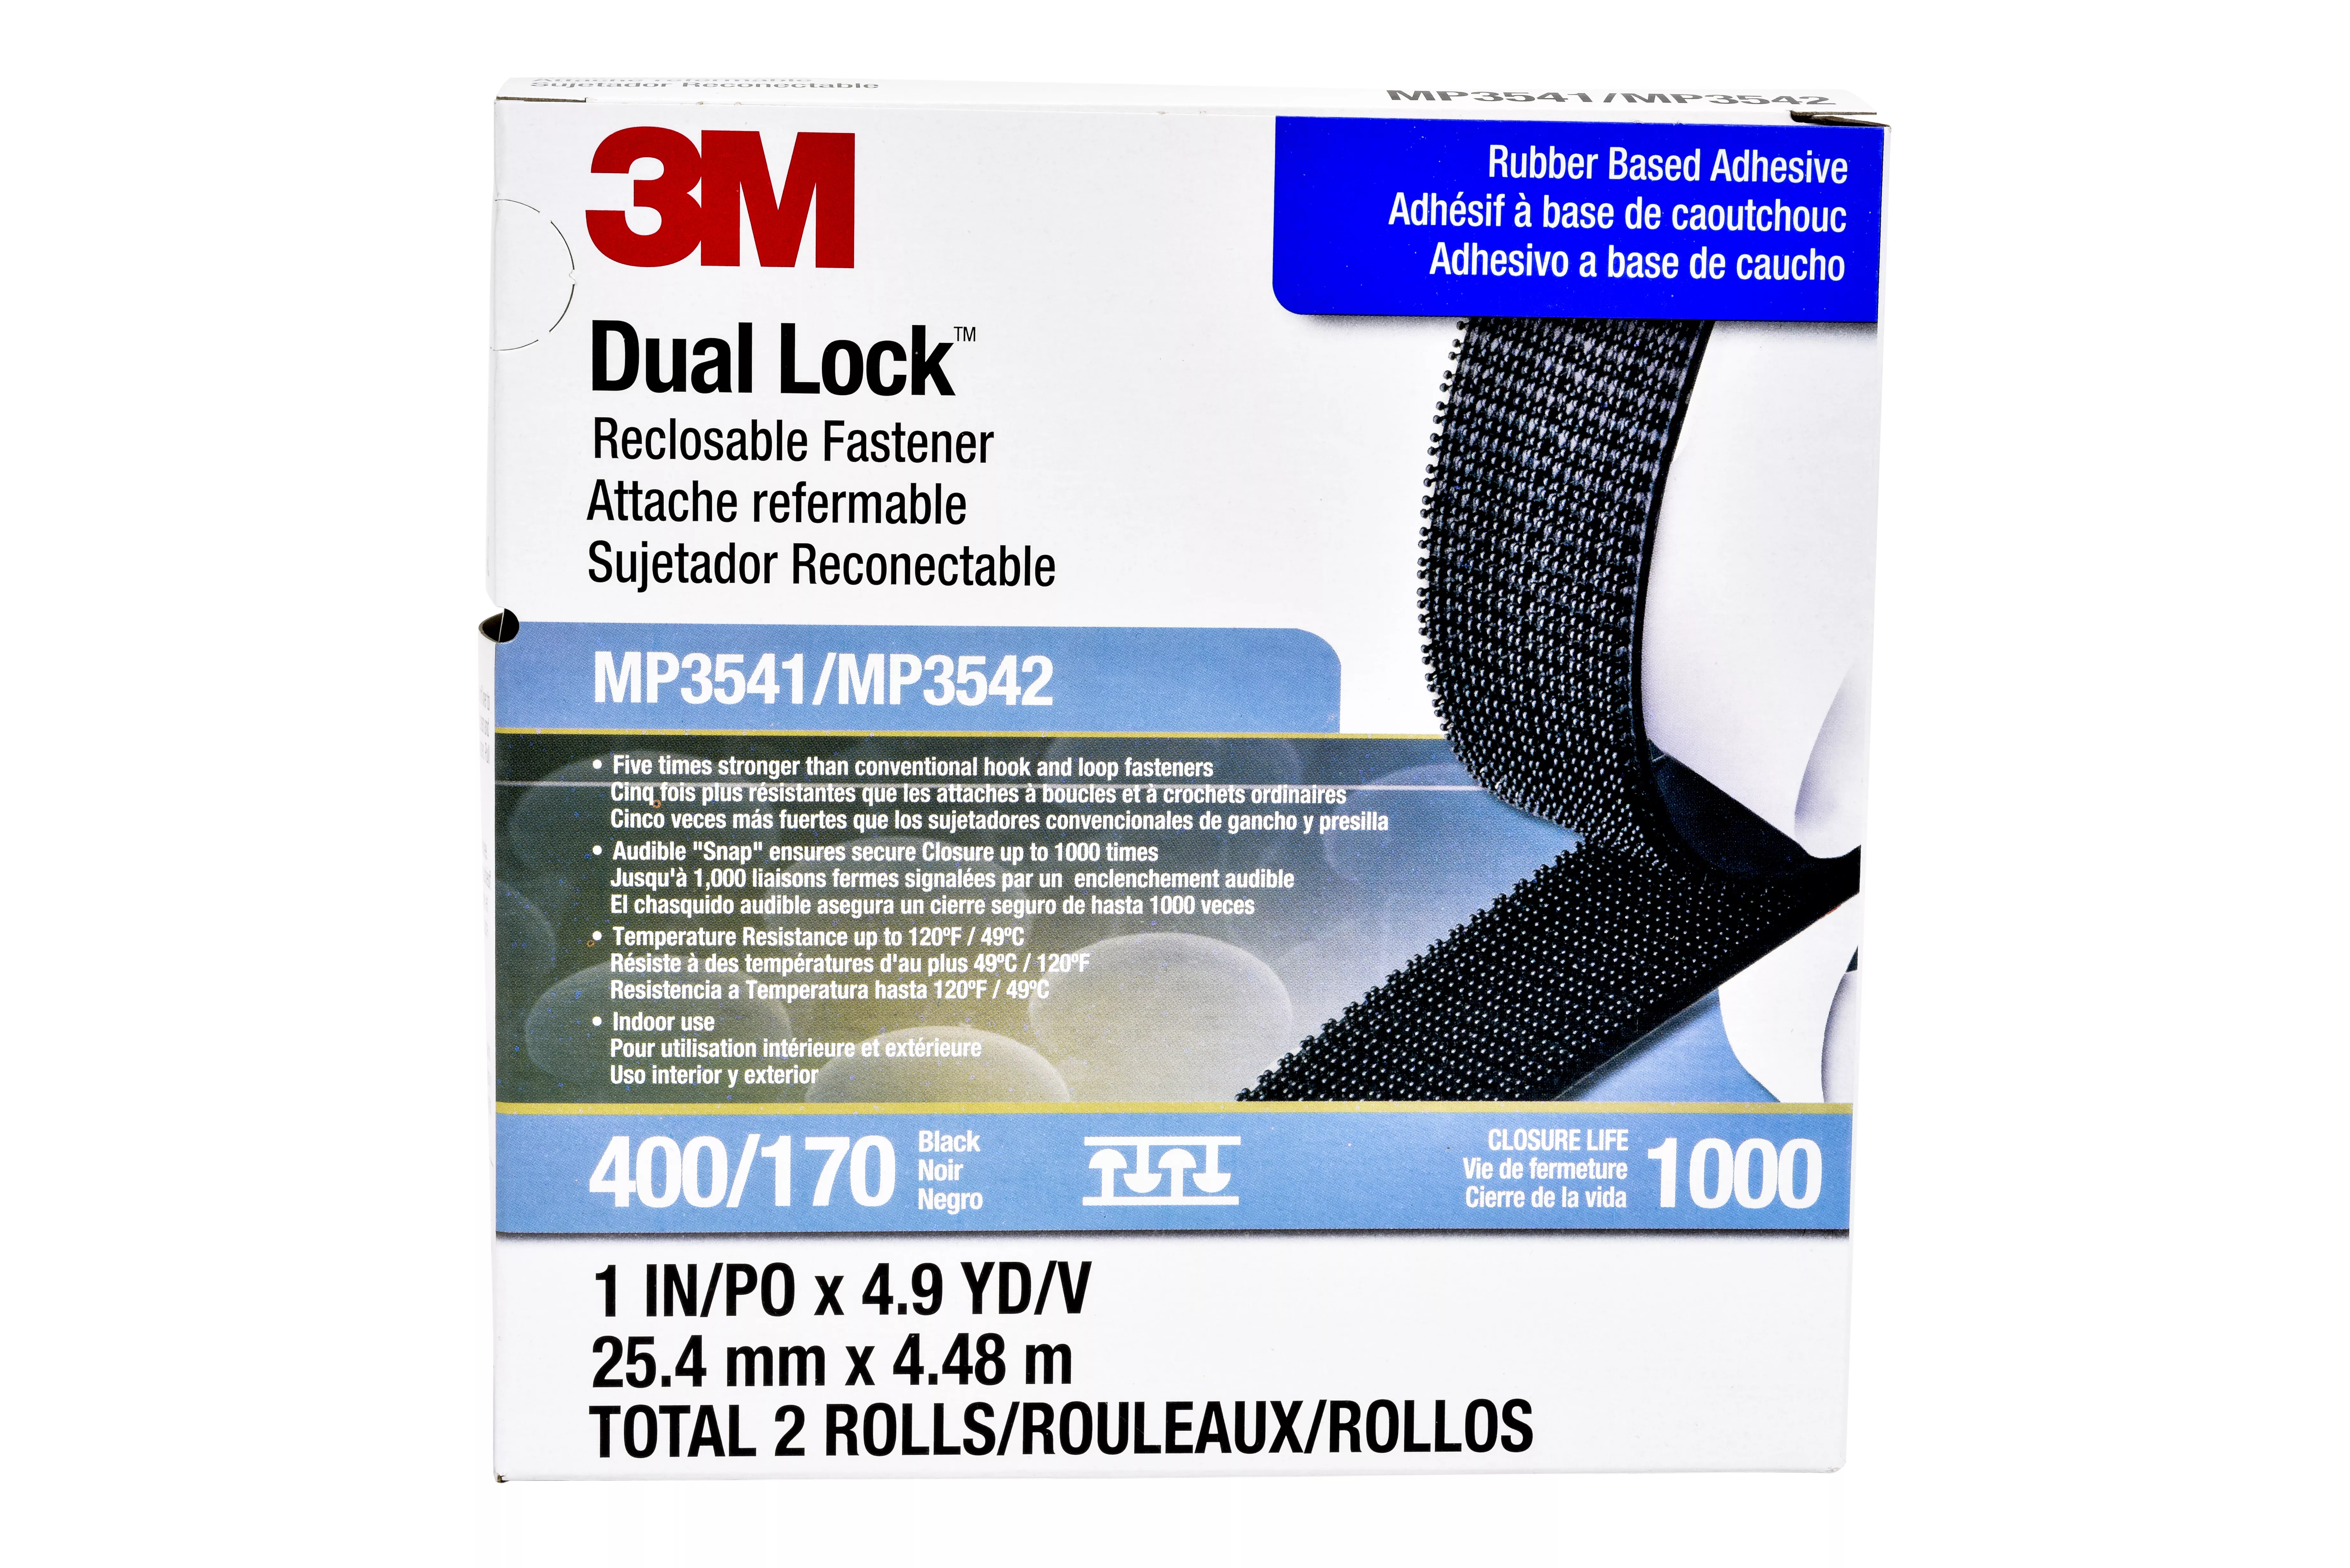 3M™ Dual Lock™ Reclosable Fastener MP3541/MP3542, Black, 1 in x 5 yd,
Type 400/170, 5 Pack/Case